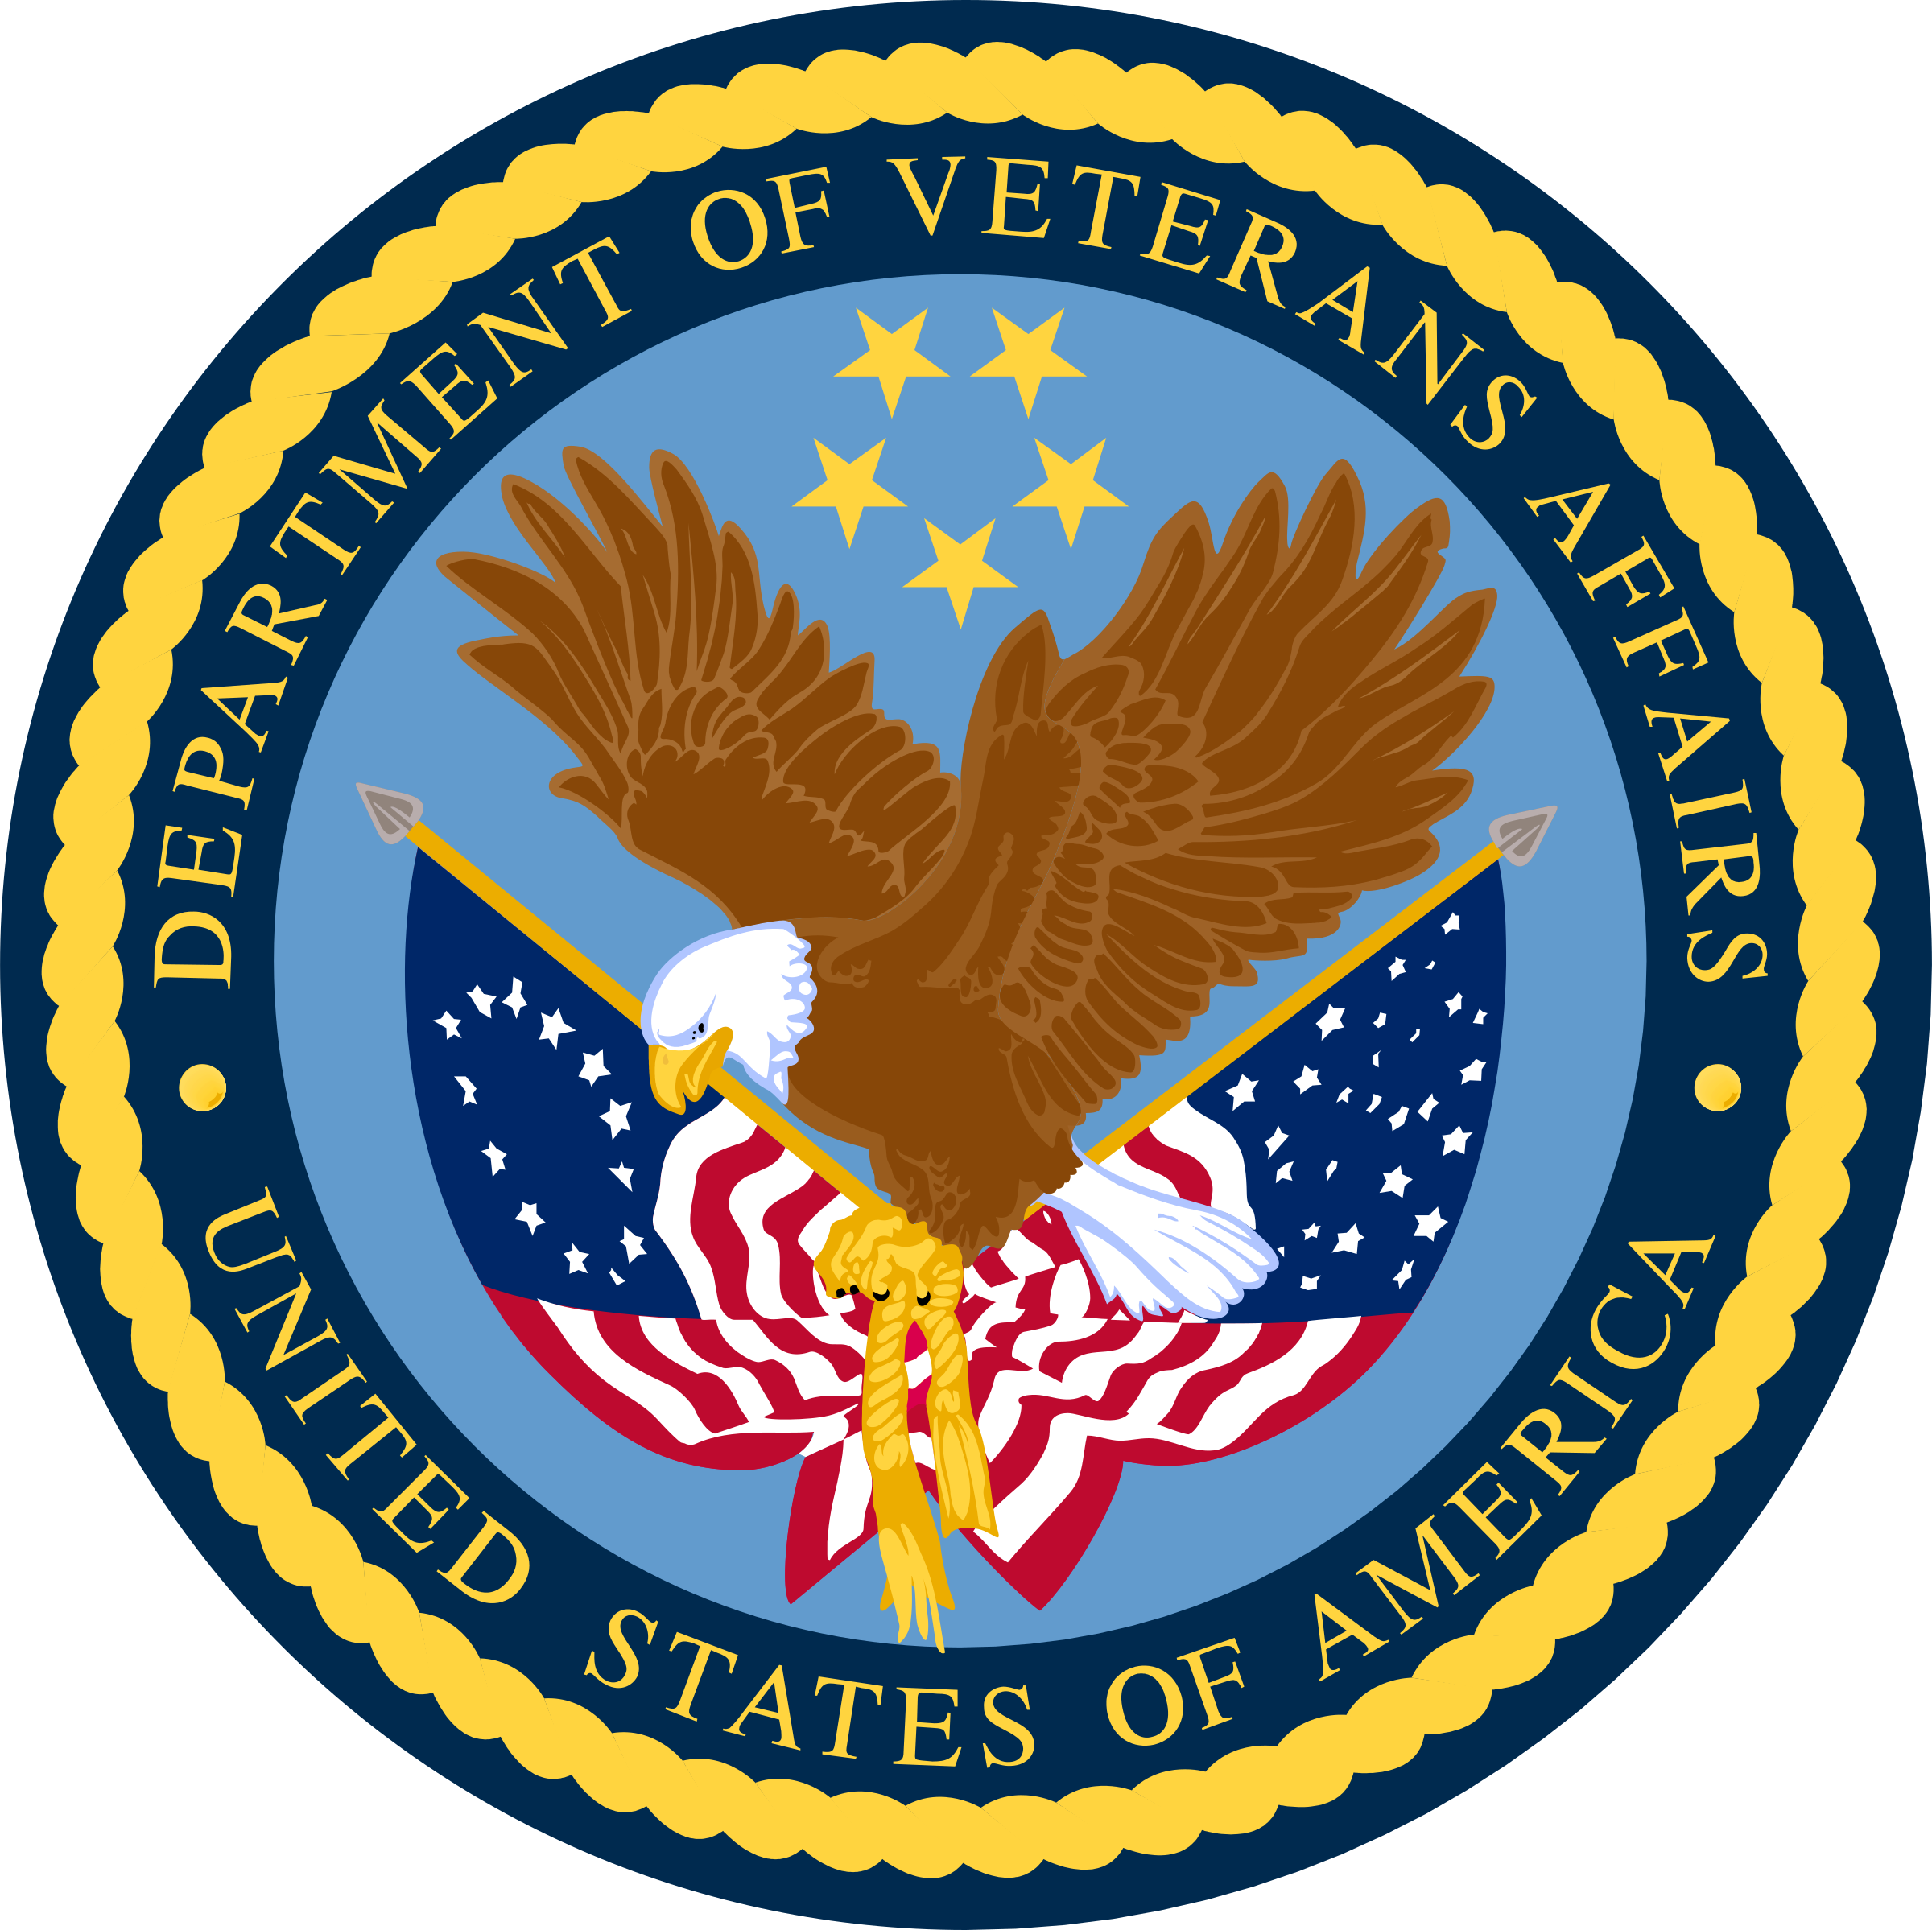 The logo for the Department of Veterans Affairs